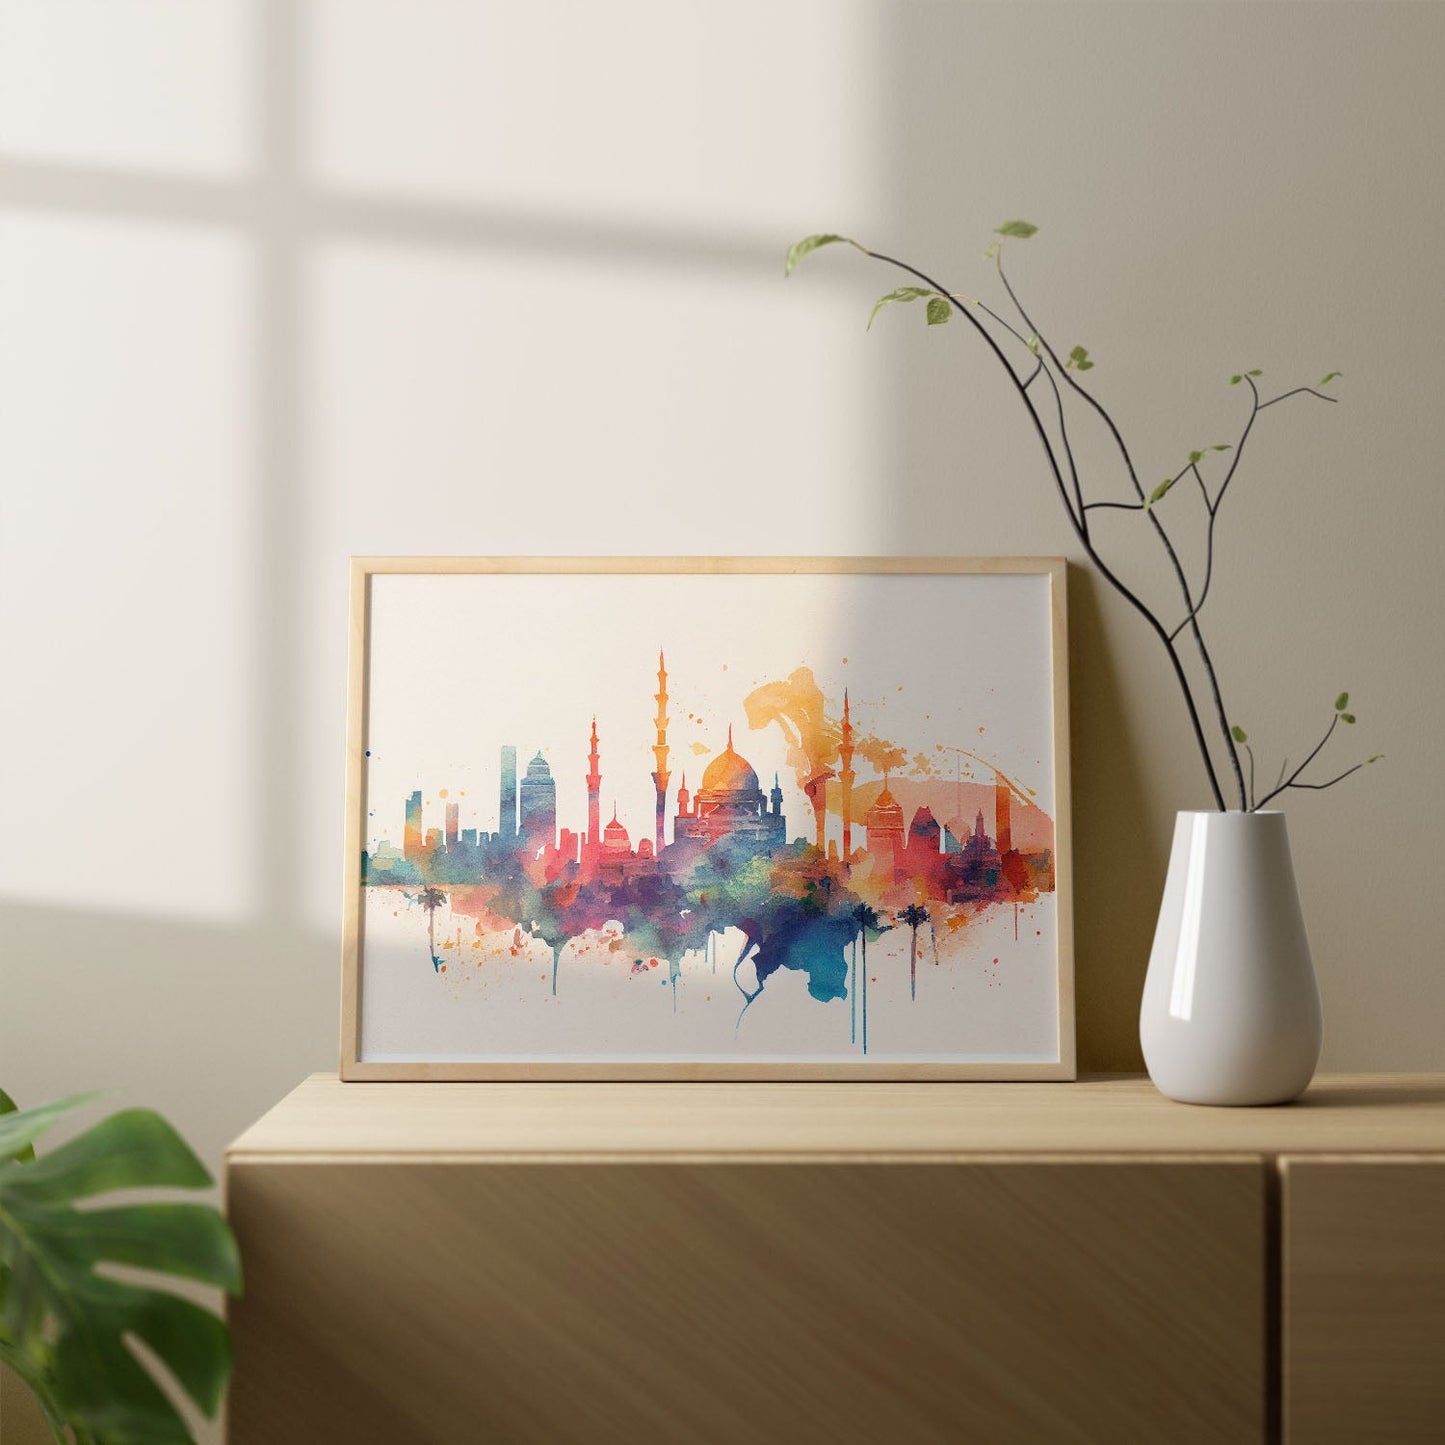 Nacnic watercolor of a skyline of the city of Cairo. Aesthetic Wall Art Prints for Bedroom or Living Room Design.